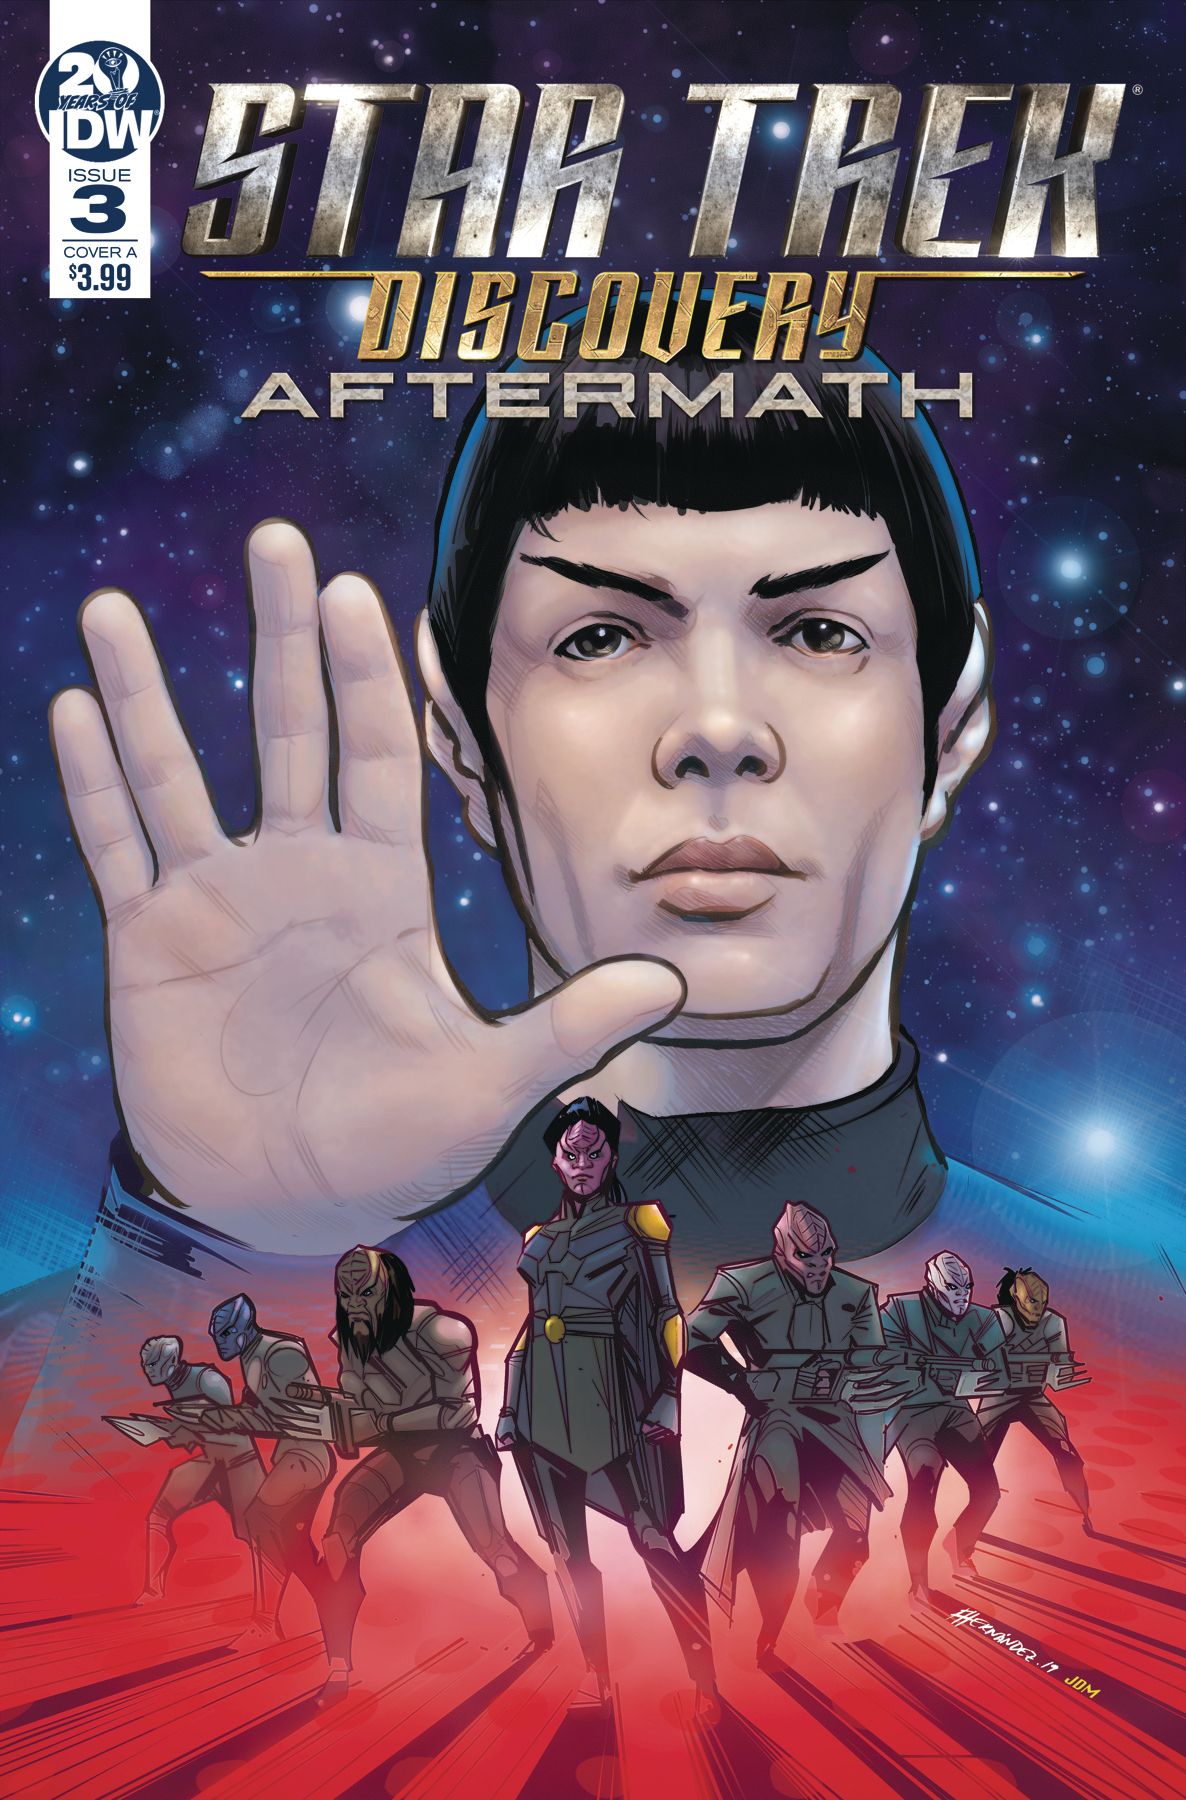 Star Trek: Discovery - Aftermath #3 Comic